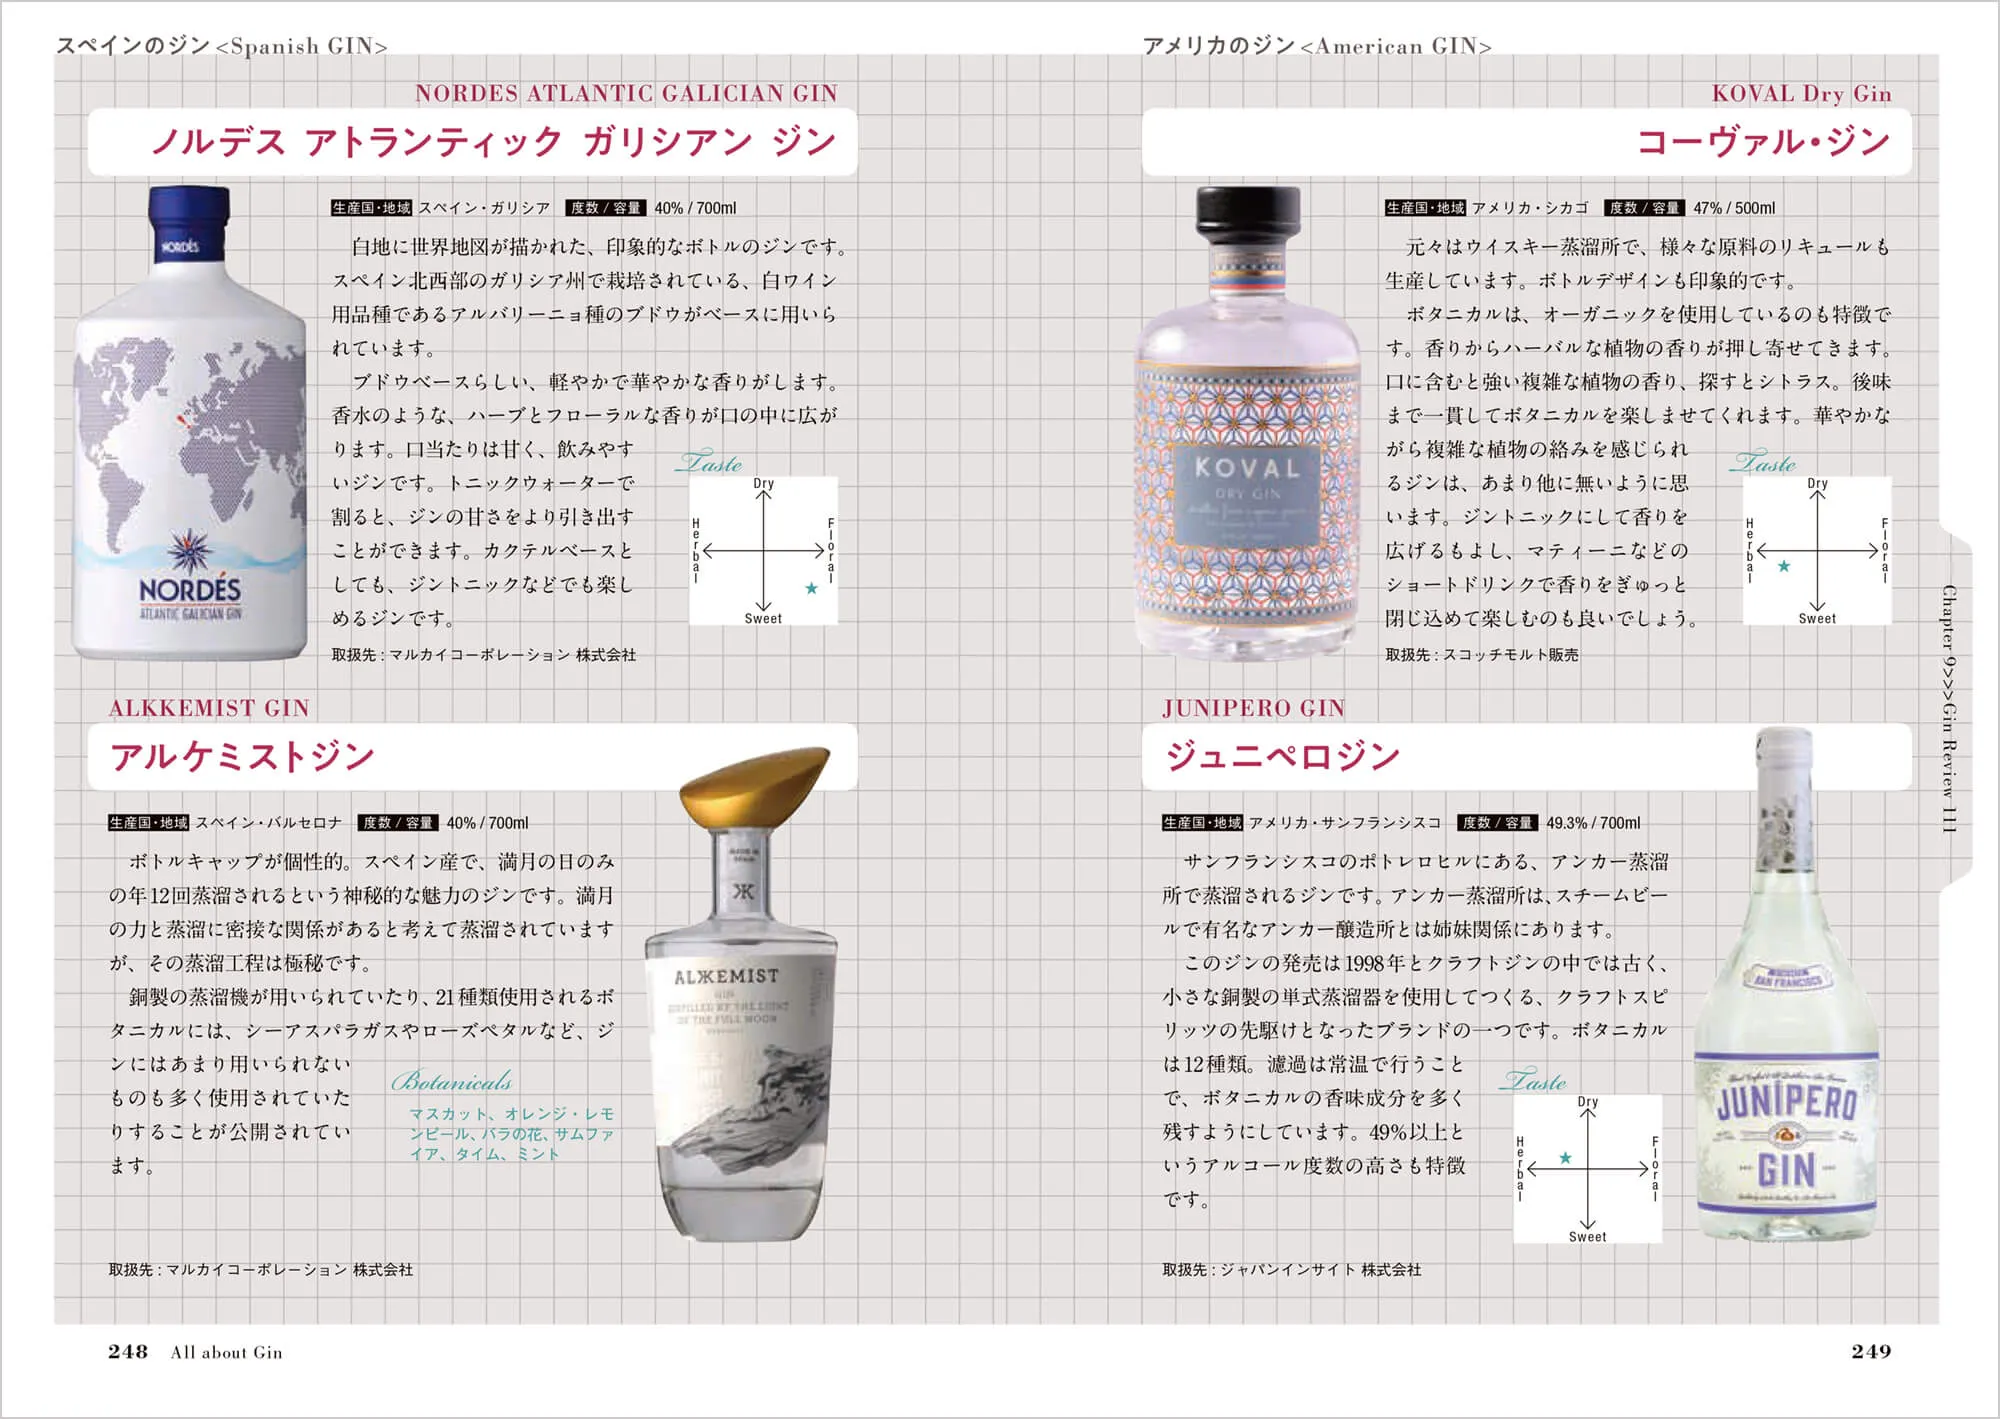 All About GIN ジンのすべて 中面